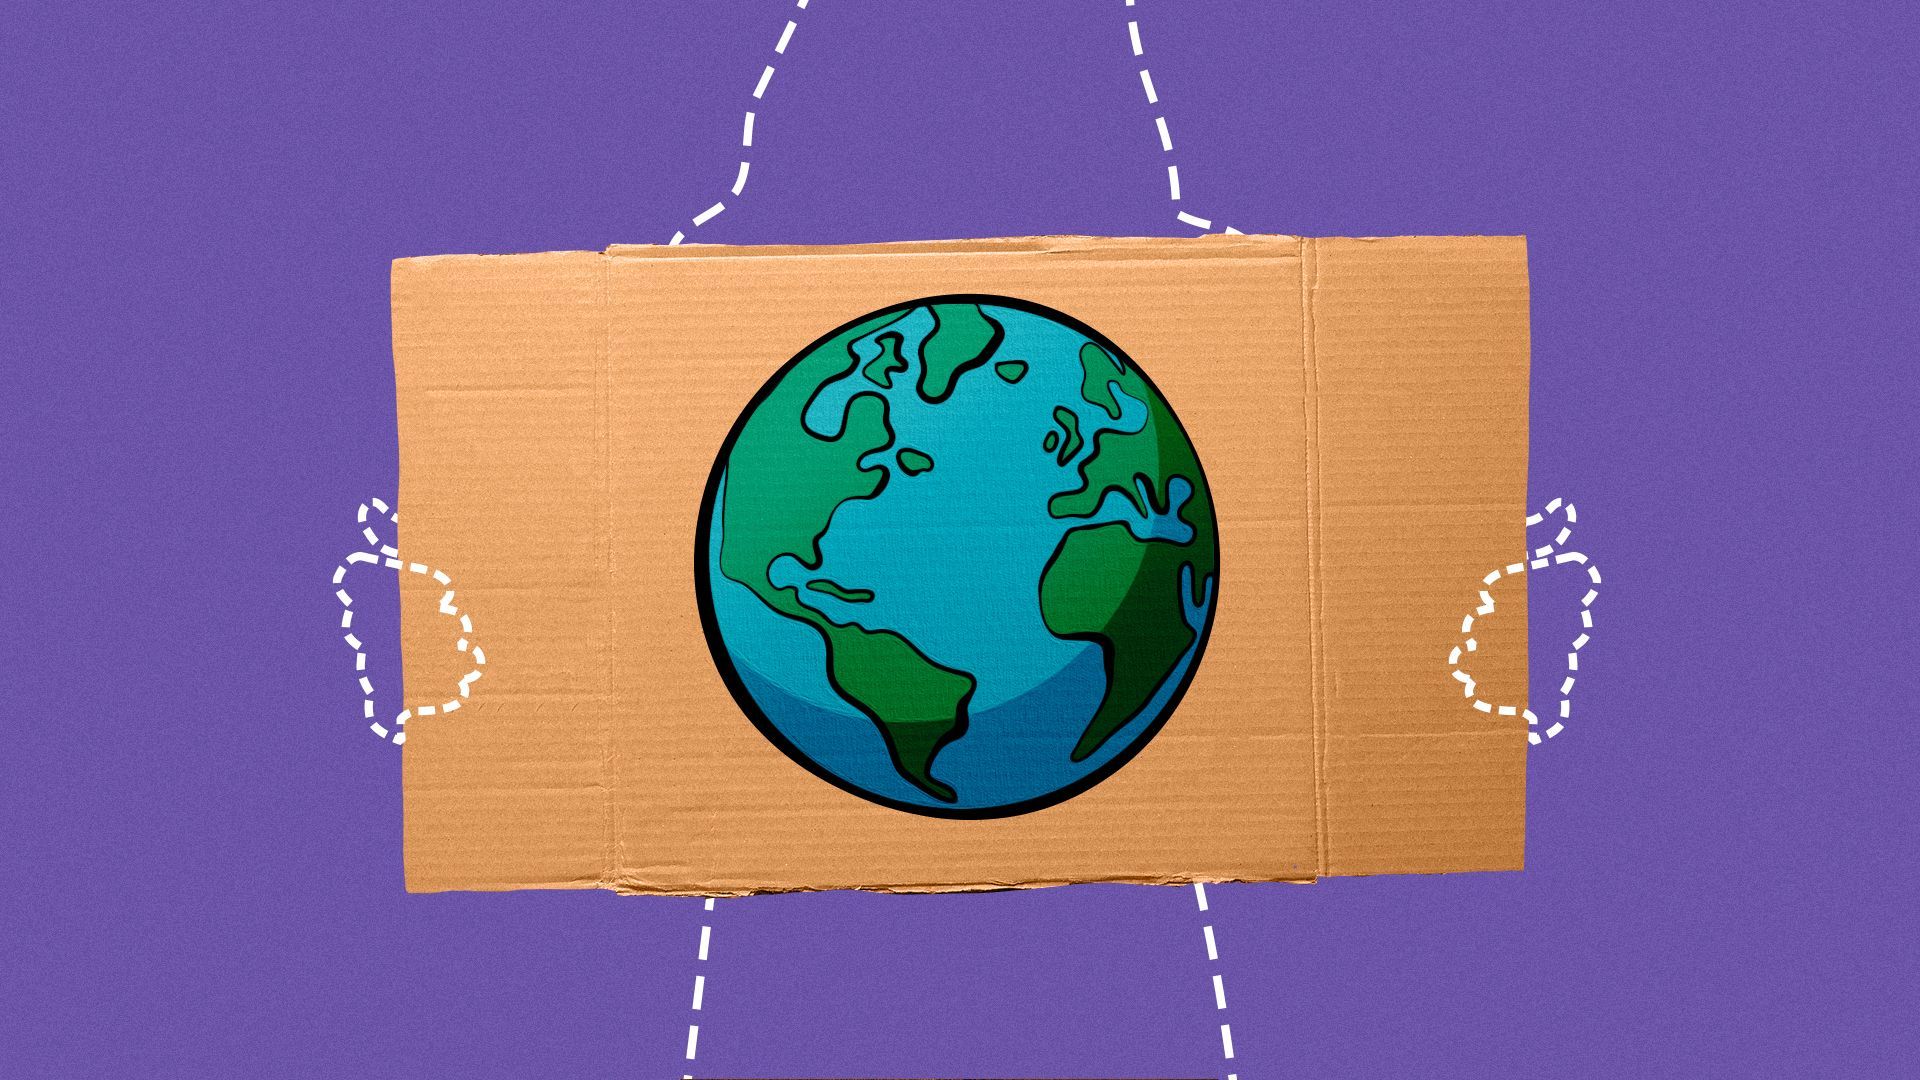 Illustration of the globe on a cardboard sign held by an invisible person with a dashed outline.